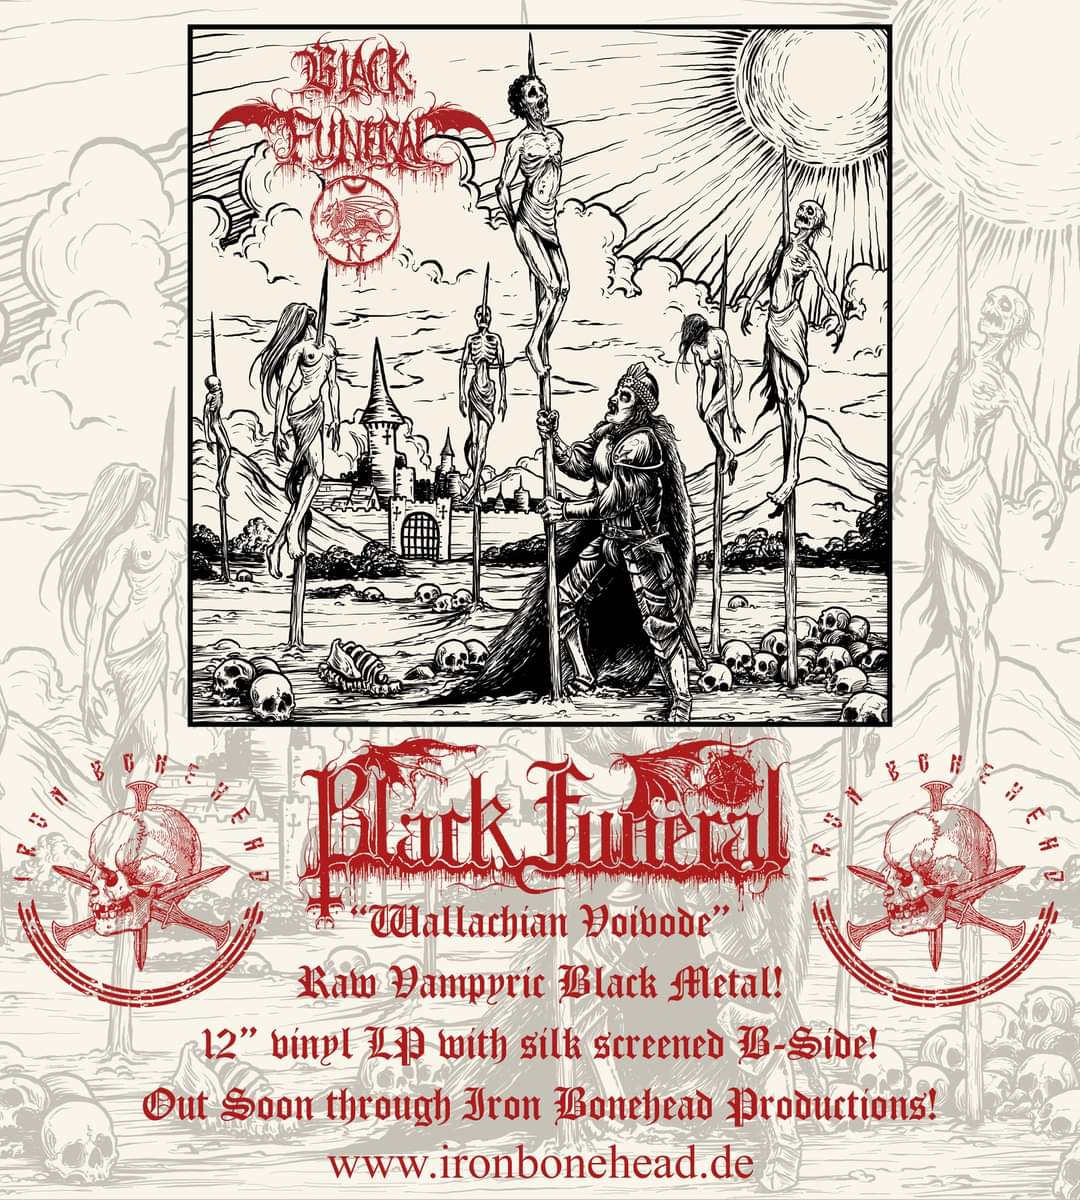 Black Funeral - Wallachian Voivode 12'MLP to be released in June 2024! Originally released on CD by Dark Adversary Productions, we are proud to present the vinyl version of the most recent release by the USBM cult Black Funeral! Limited to 300 copies.